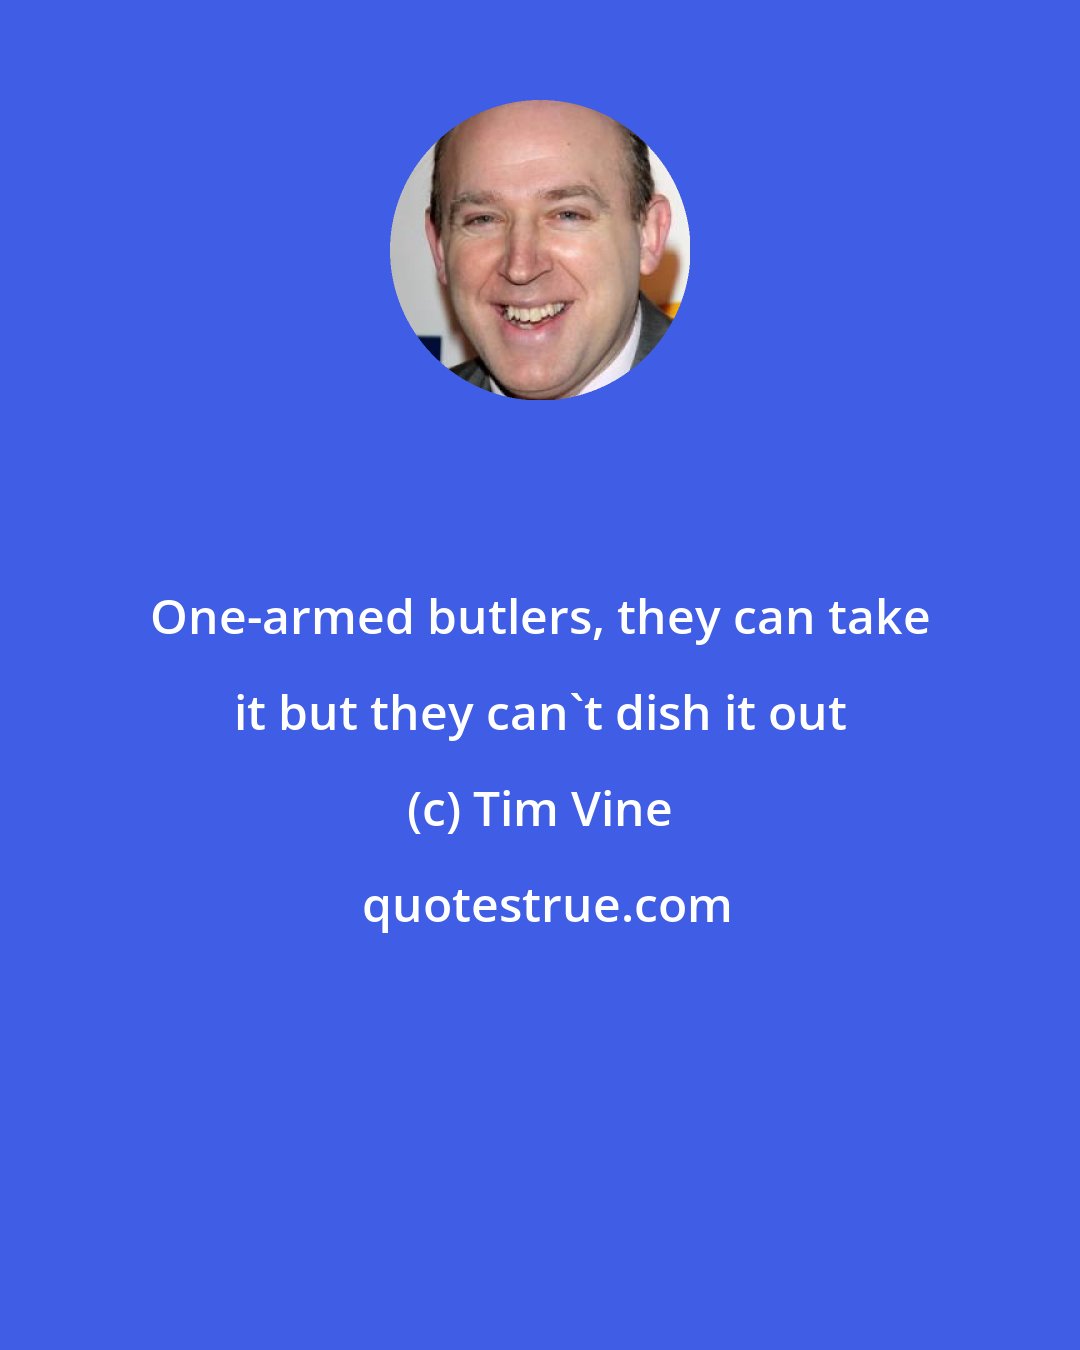 Tim Vine: One-armed butlers, they can take it but they can't dish it out